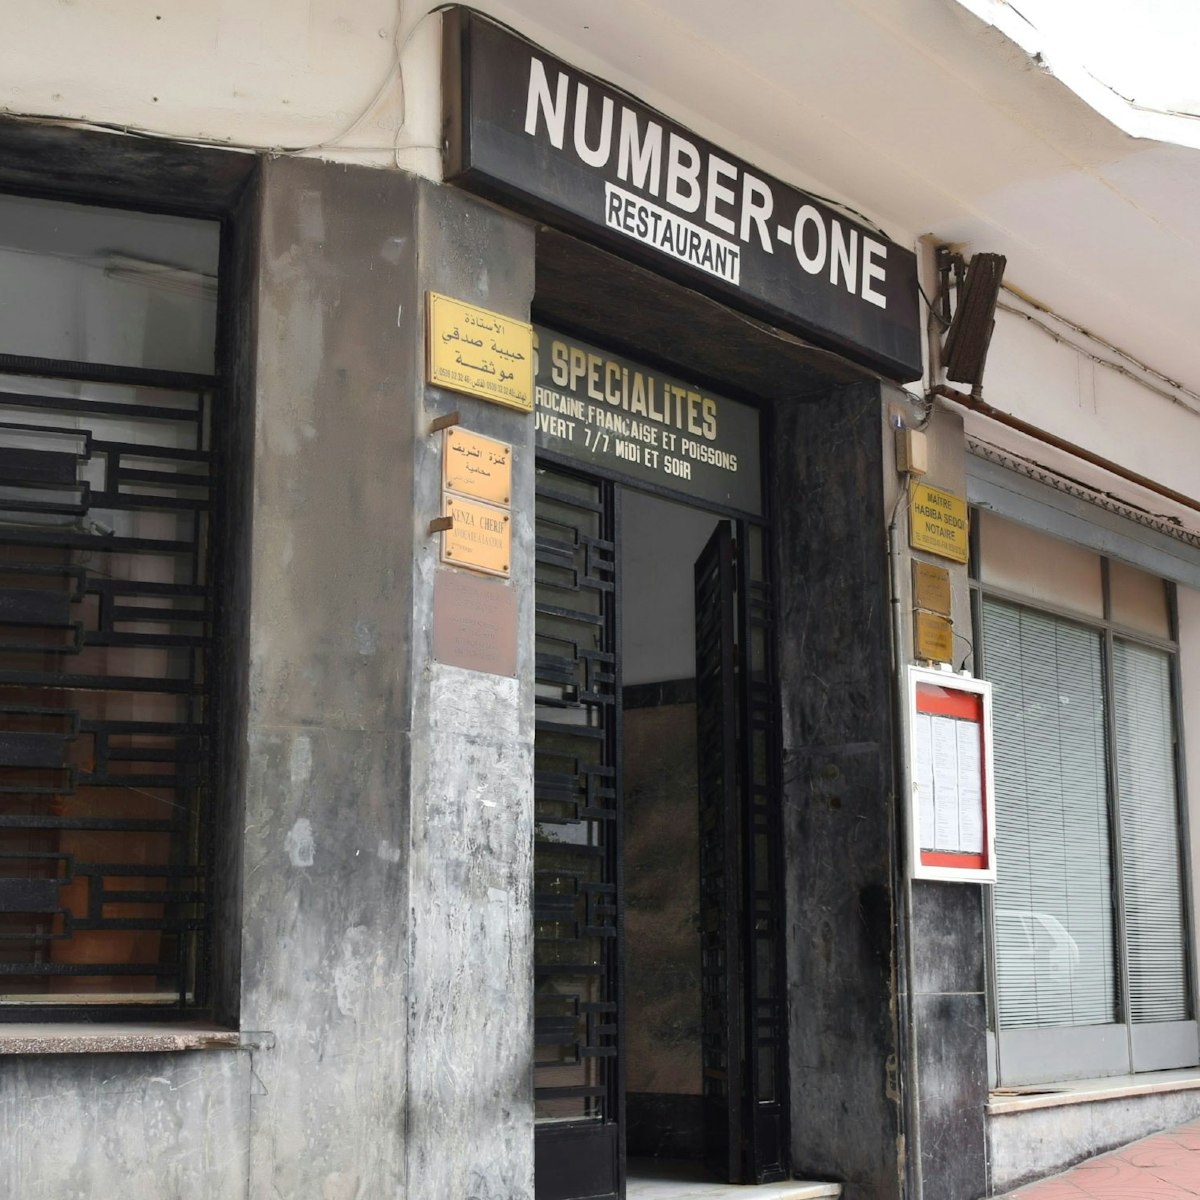 Exterior of Number One Restaurant.